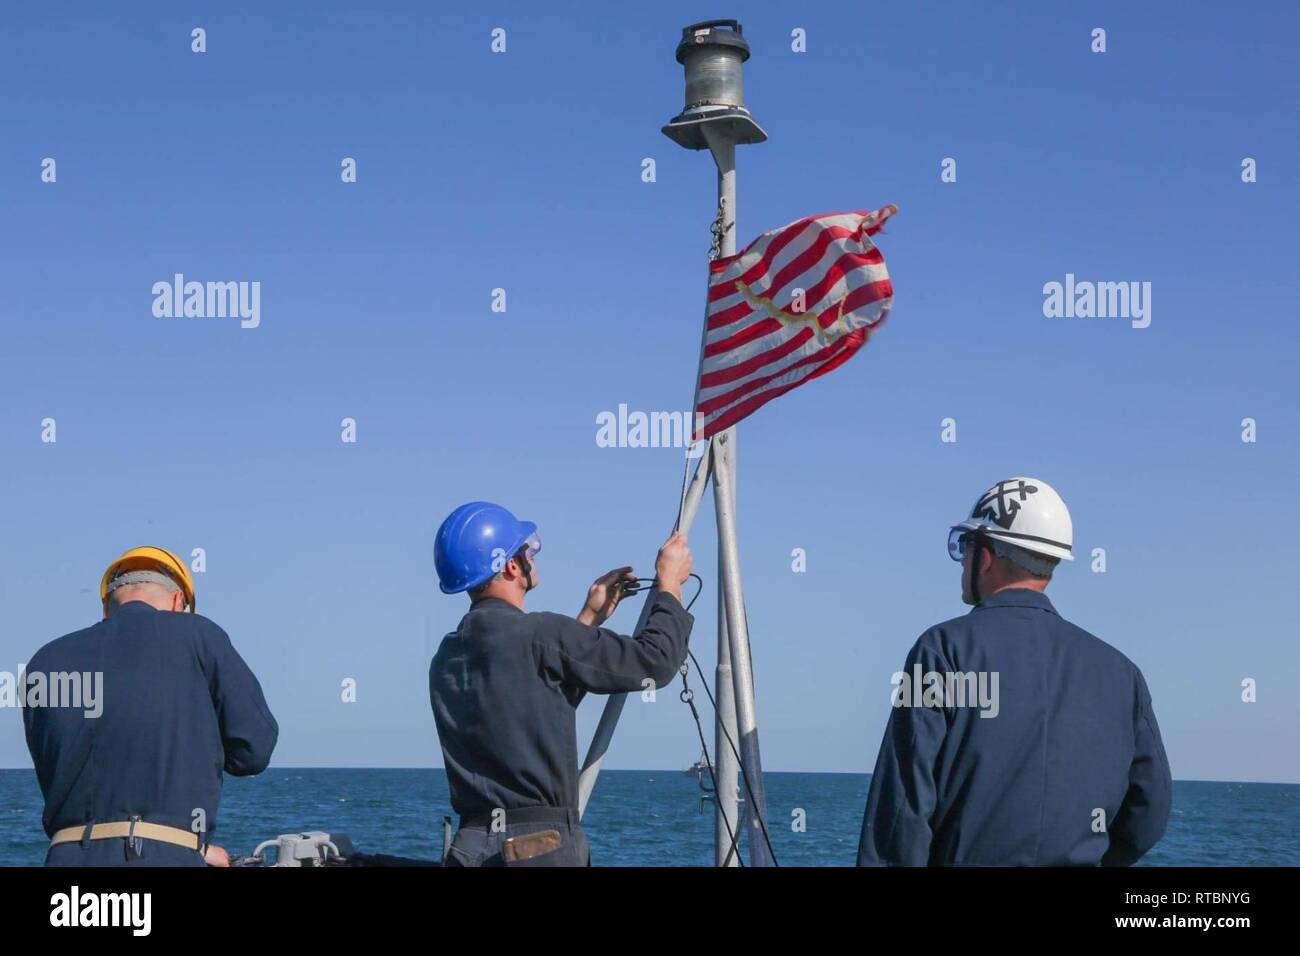 ARABIAN GULF (Feb. 9, 2019) Engineman 2nd Class John Vankouwenberg raises the Union Jack aboard the Cyclone-class coastal patrol ship USS Thunderbolt (PC 12). Thunderbolt is forward deployed to the U.S. 5th Fleet area of operations in support of naval operations to ensure maritime stability and security in the Central region, connecting the Mediterranean and the Pacific through the western Indian Ocean and three strategic choke points. Stock Photo